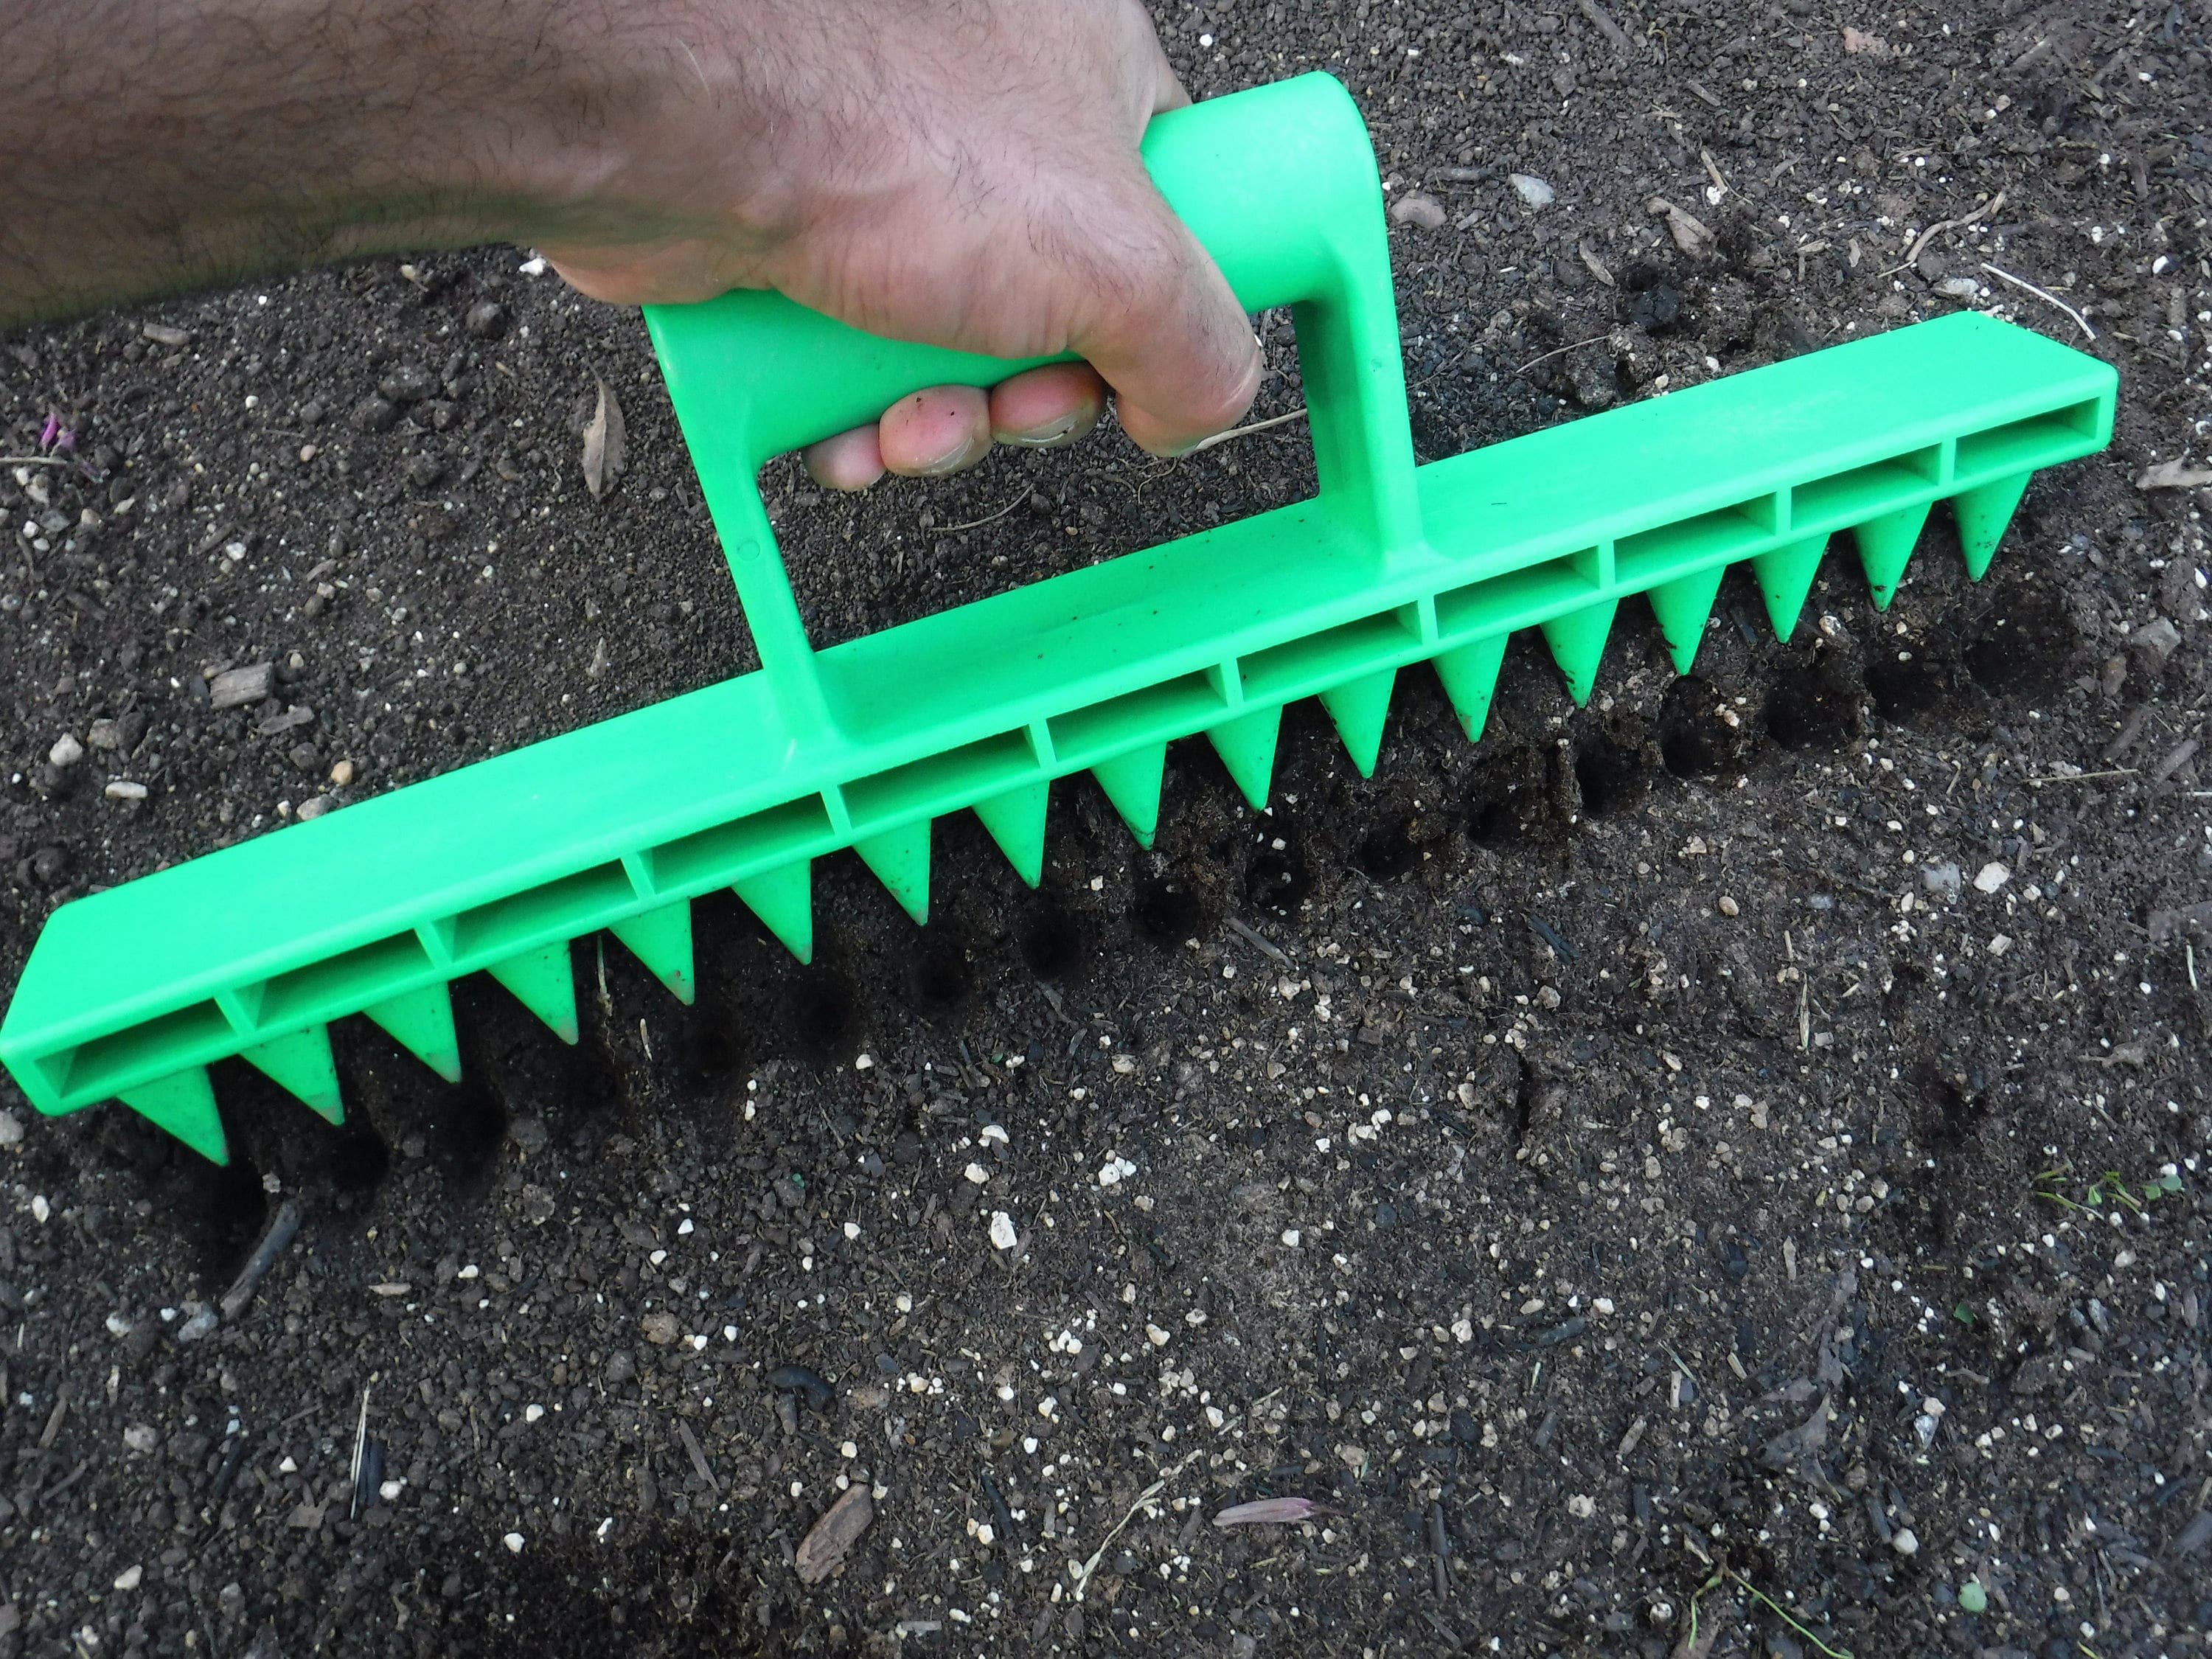 Seed-in Soil Digger and Soil Spacer for Planting Seeds